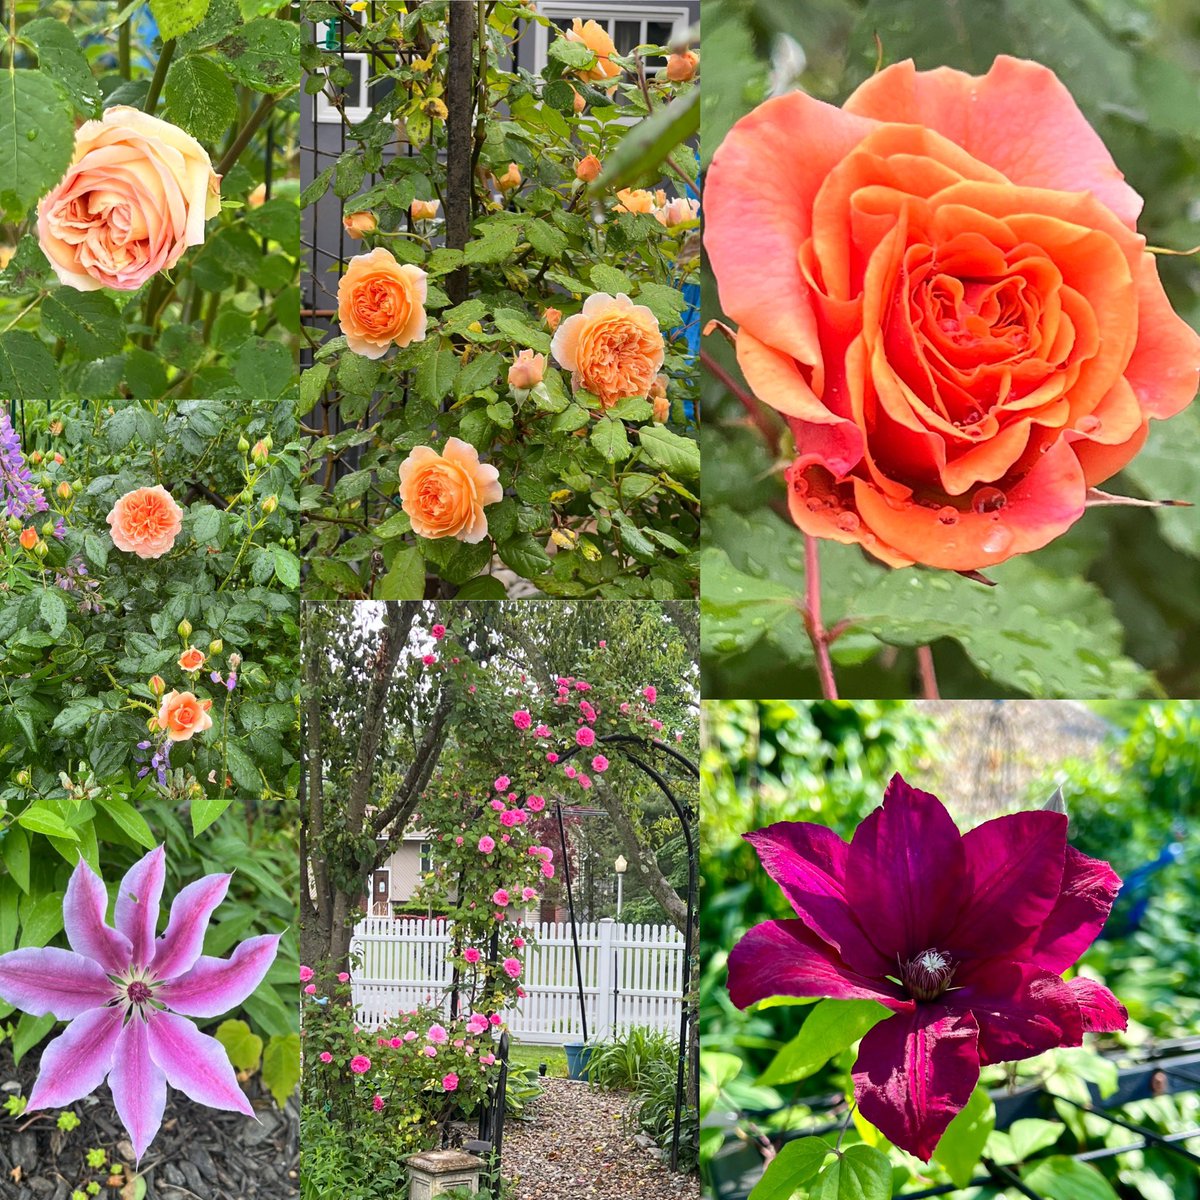 First flush of roses
Bathsheba, Crown Princess Margareta, Crazy Love, clematis Cardinal Rouge, Zephrine Drohin, clematis Nelly Moser, At Last
#SevenOnSunday